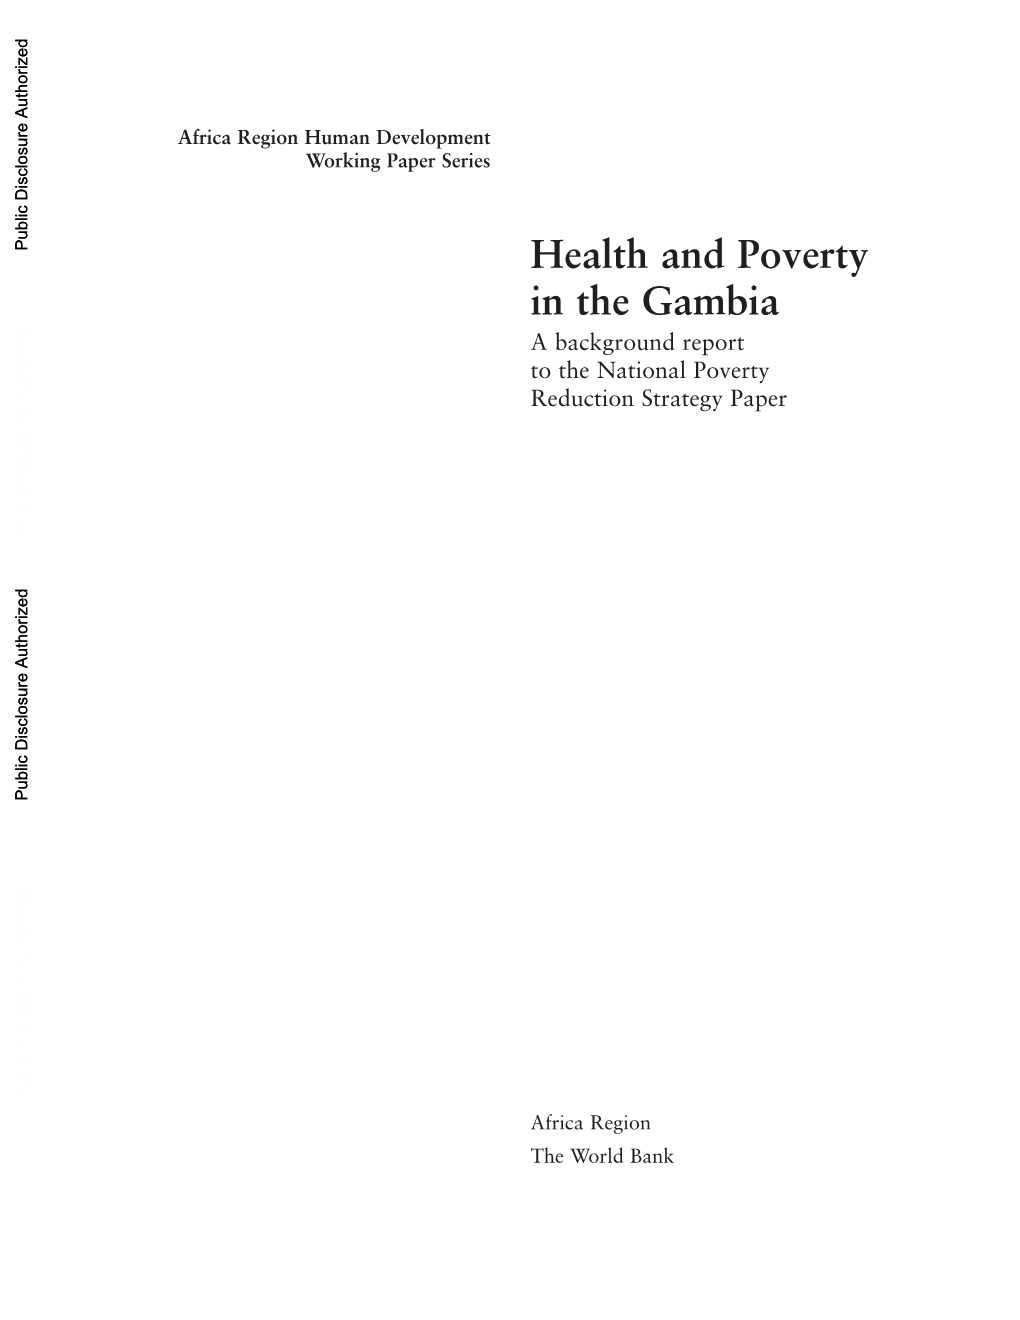 Health and Poverty in the Gambia